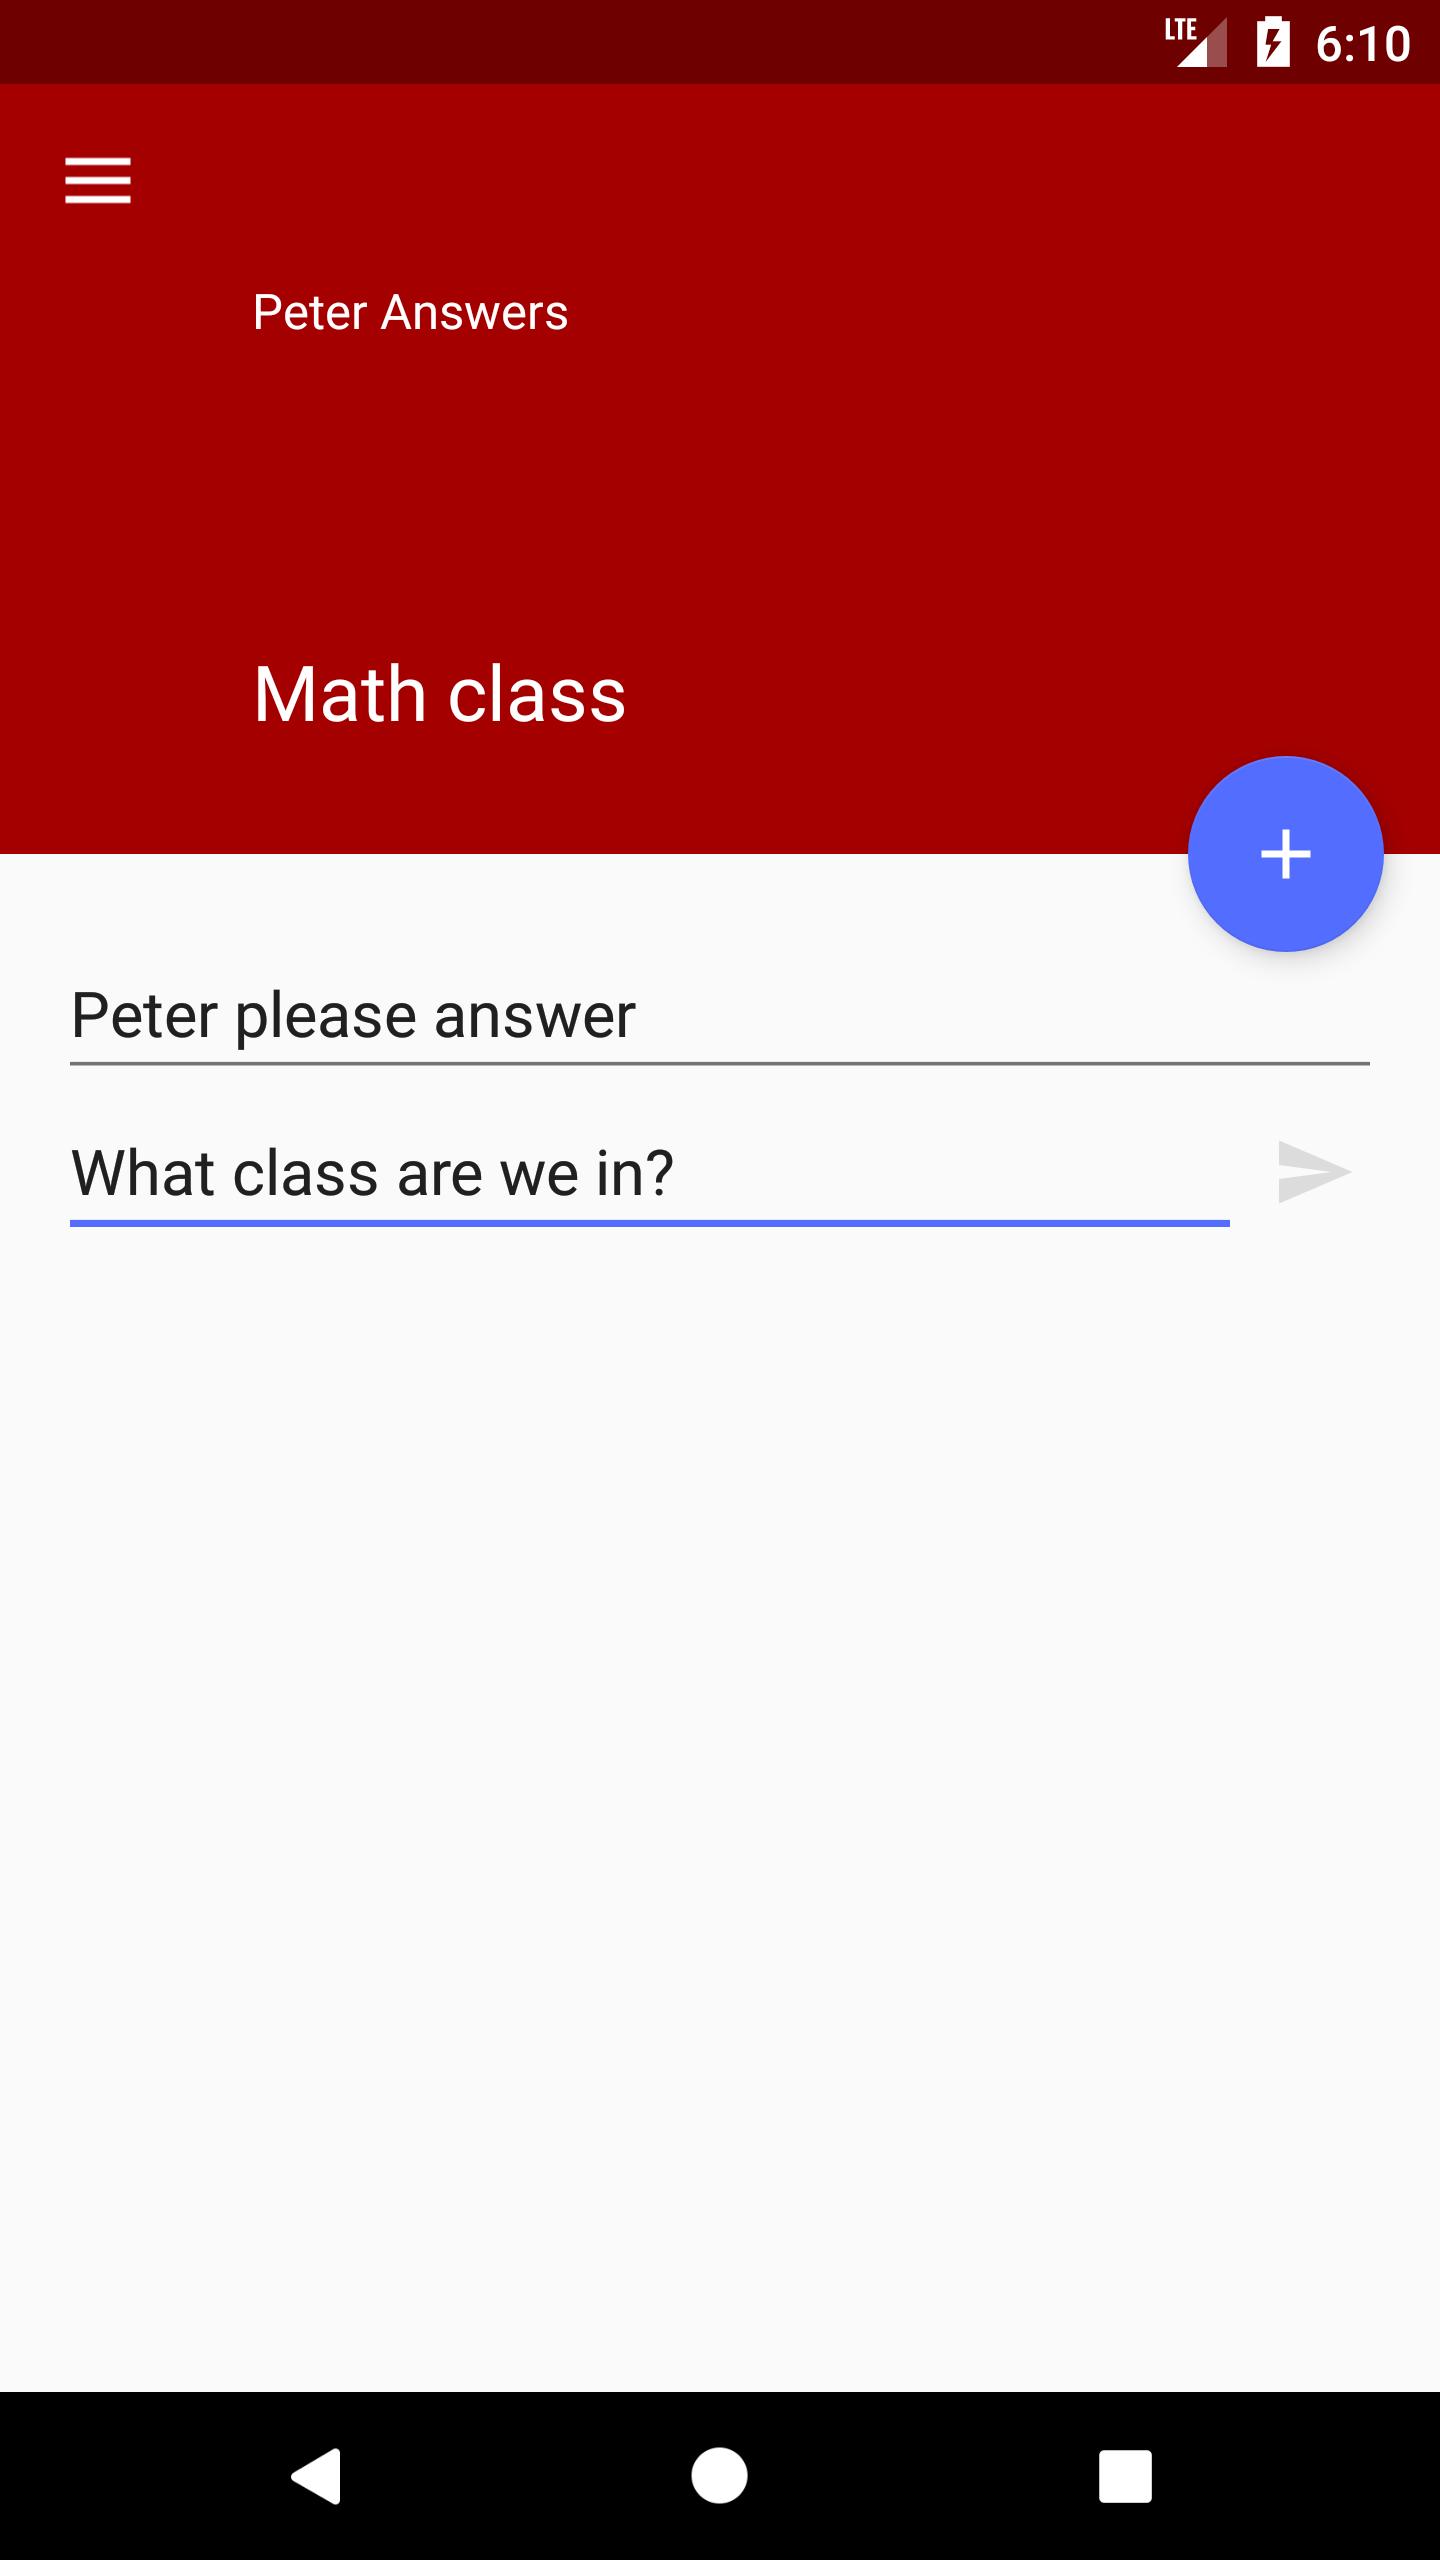 Peter please. Peter answers.